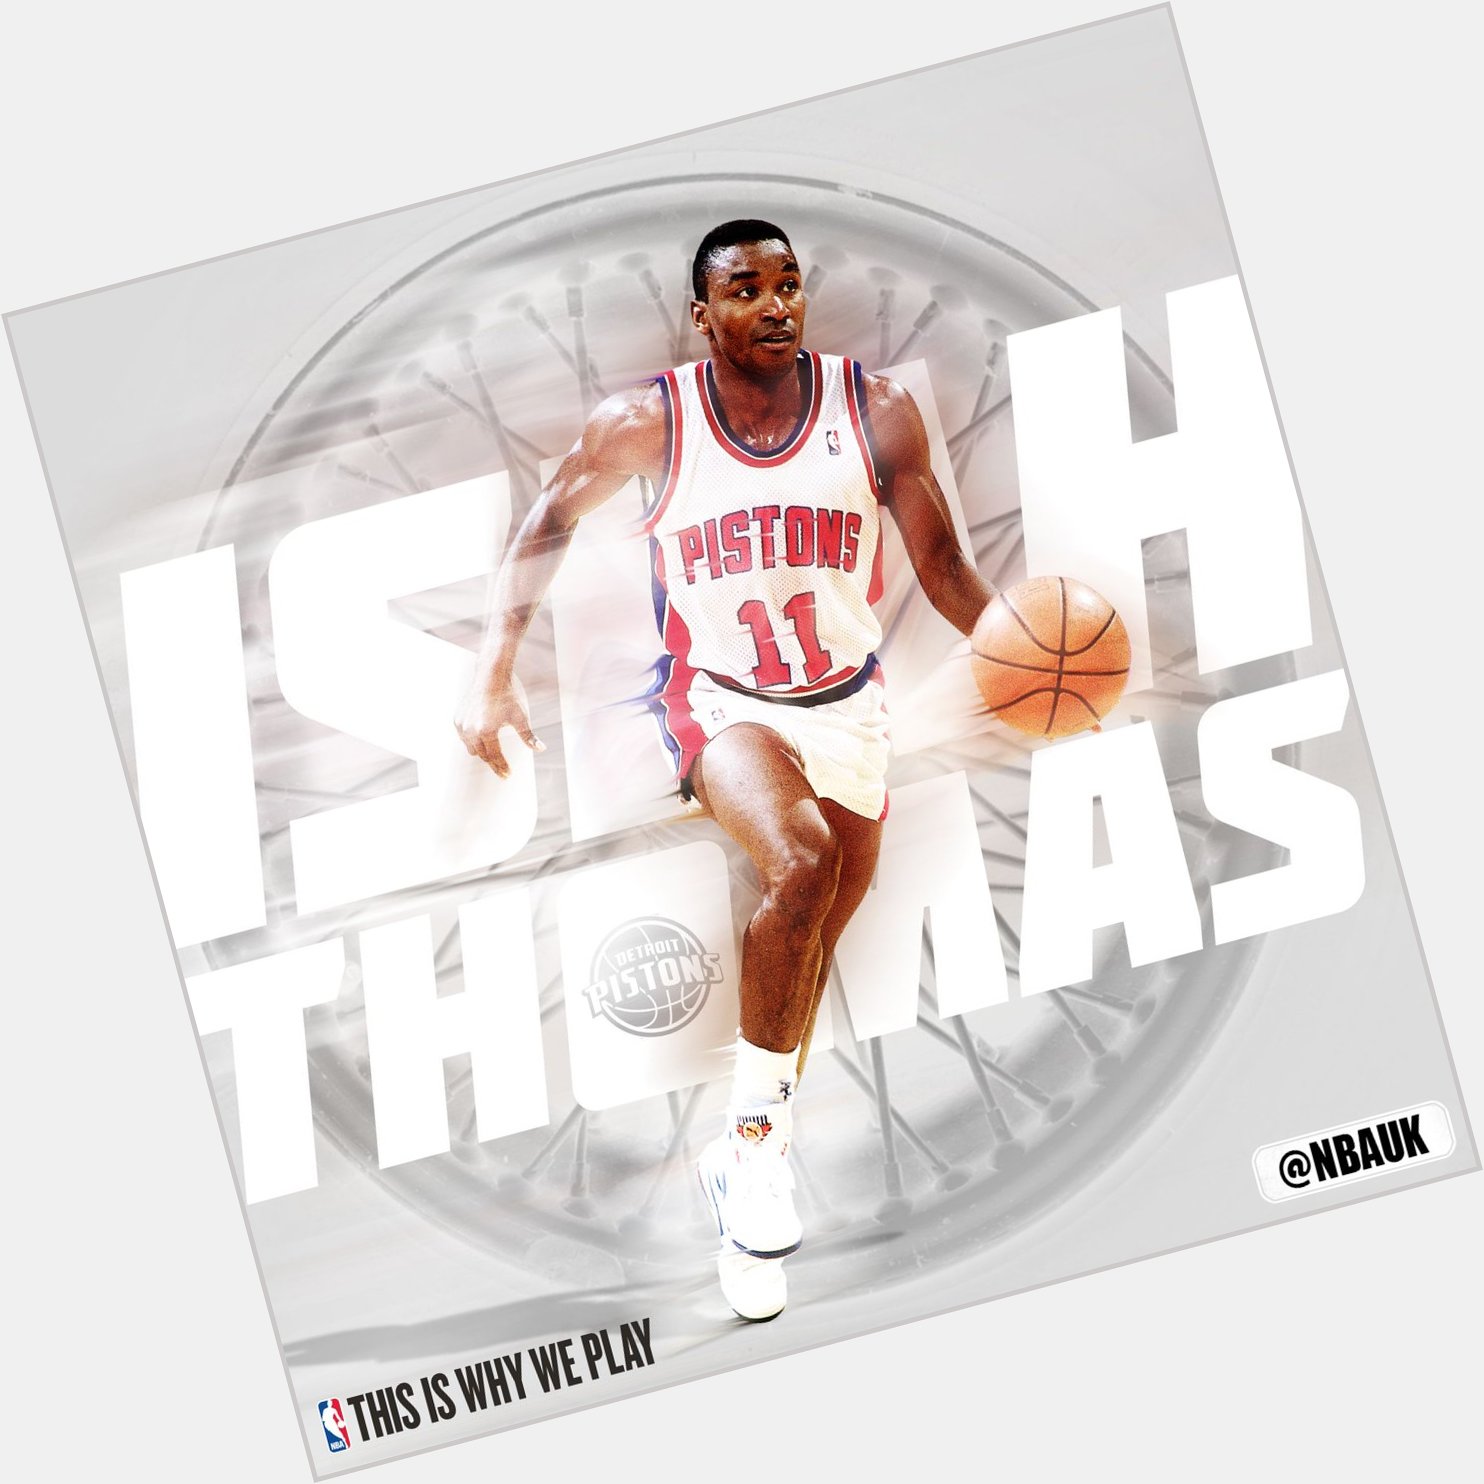 Join us in wishing 2x NBA Champion , 12x NBA All-Star and Detroit Pistons legend Isiah Thomas a happy birthday!  